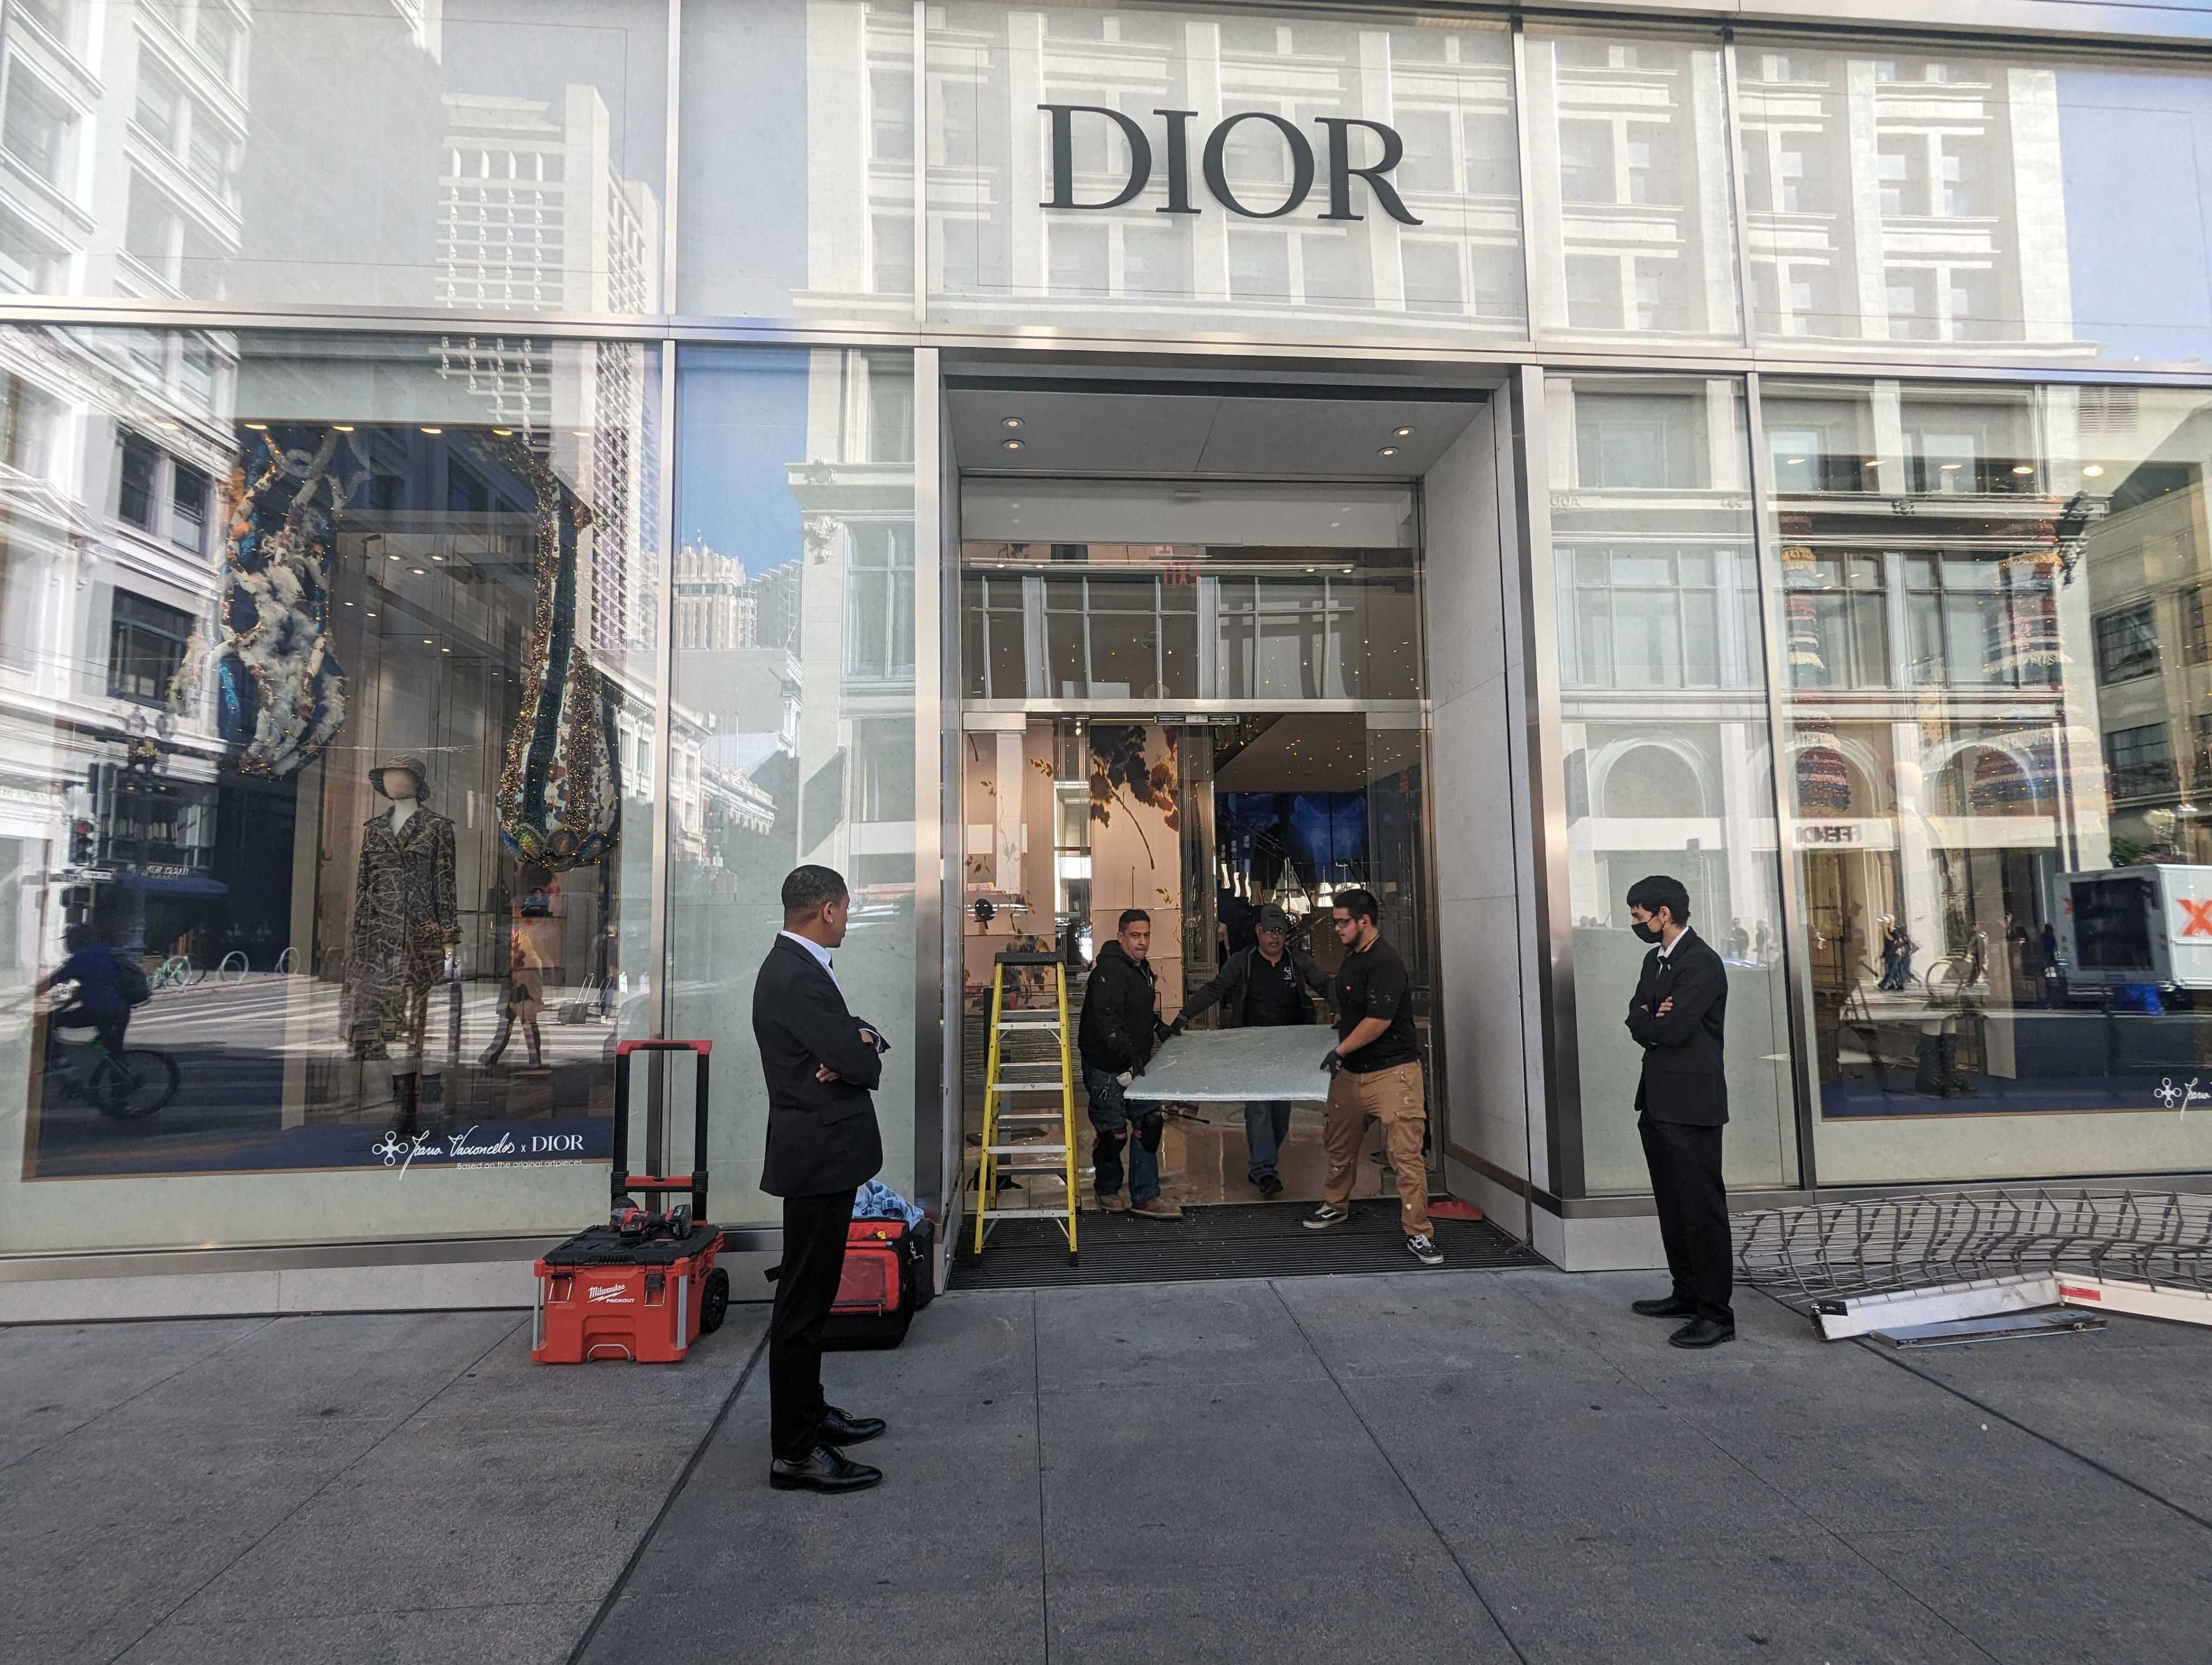 Security guards stand near the entrance to a luxury clothing store while workmen fix the doorway.